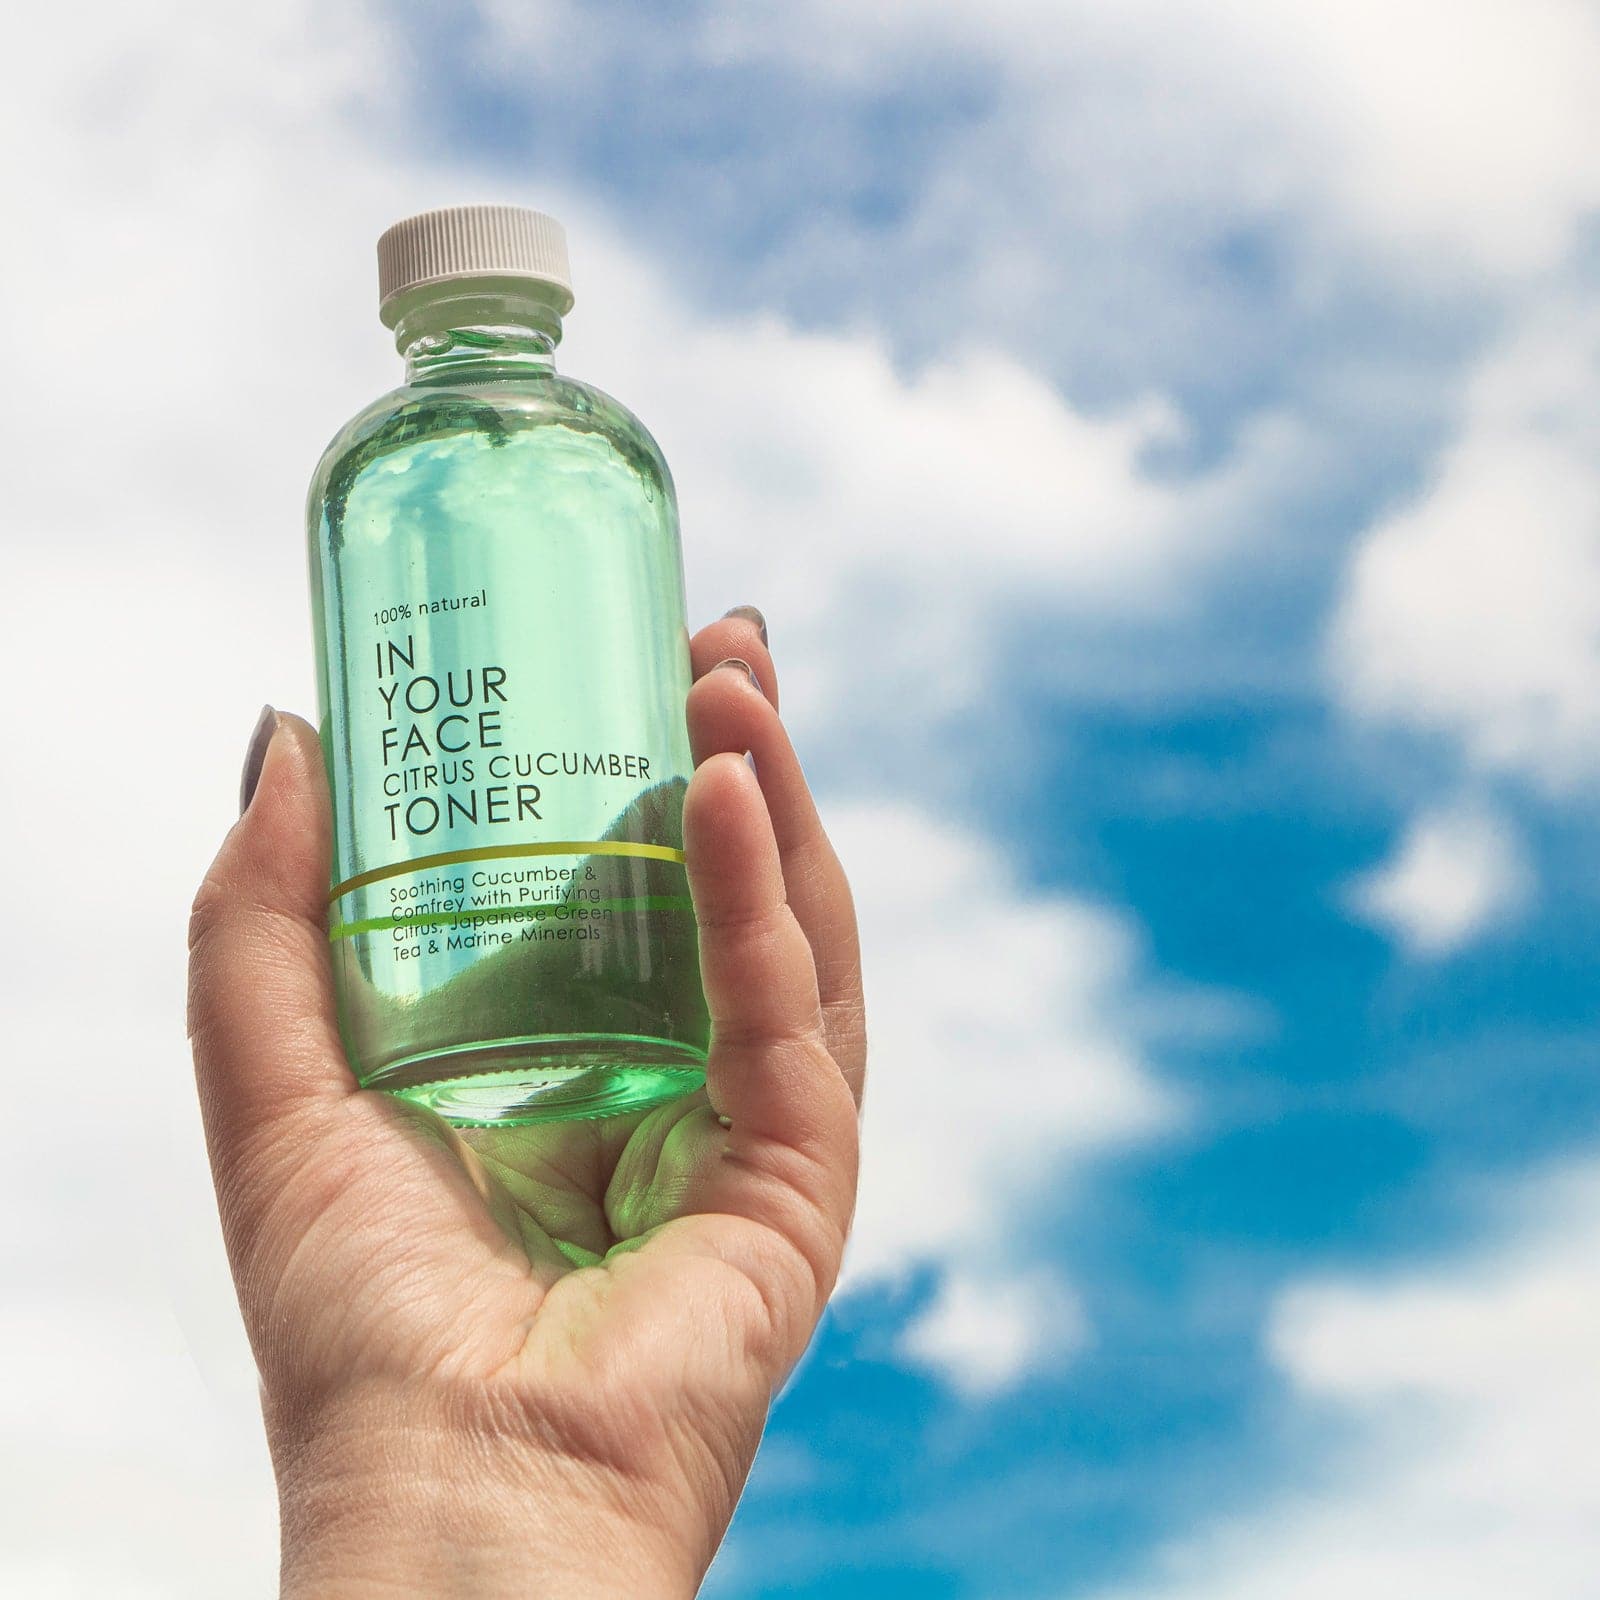 A bottle of the TONER being held in a hand up to a pretty blue sky with clouds.